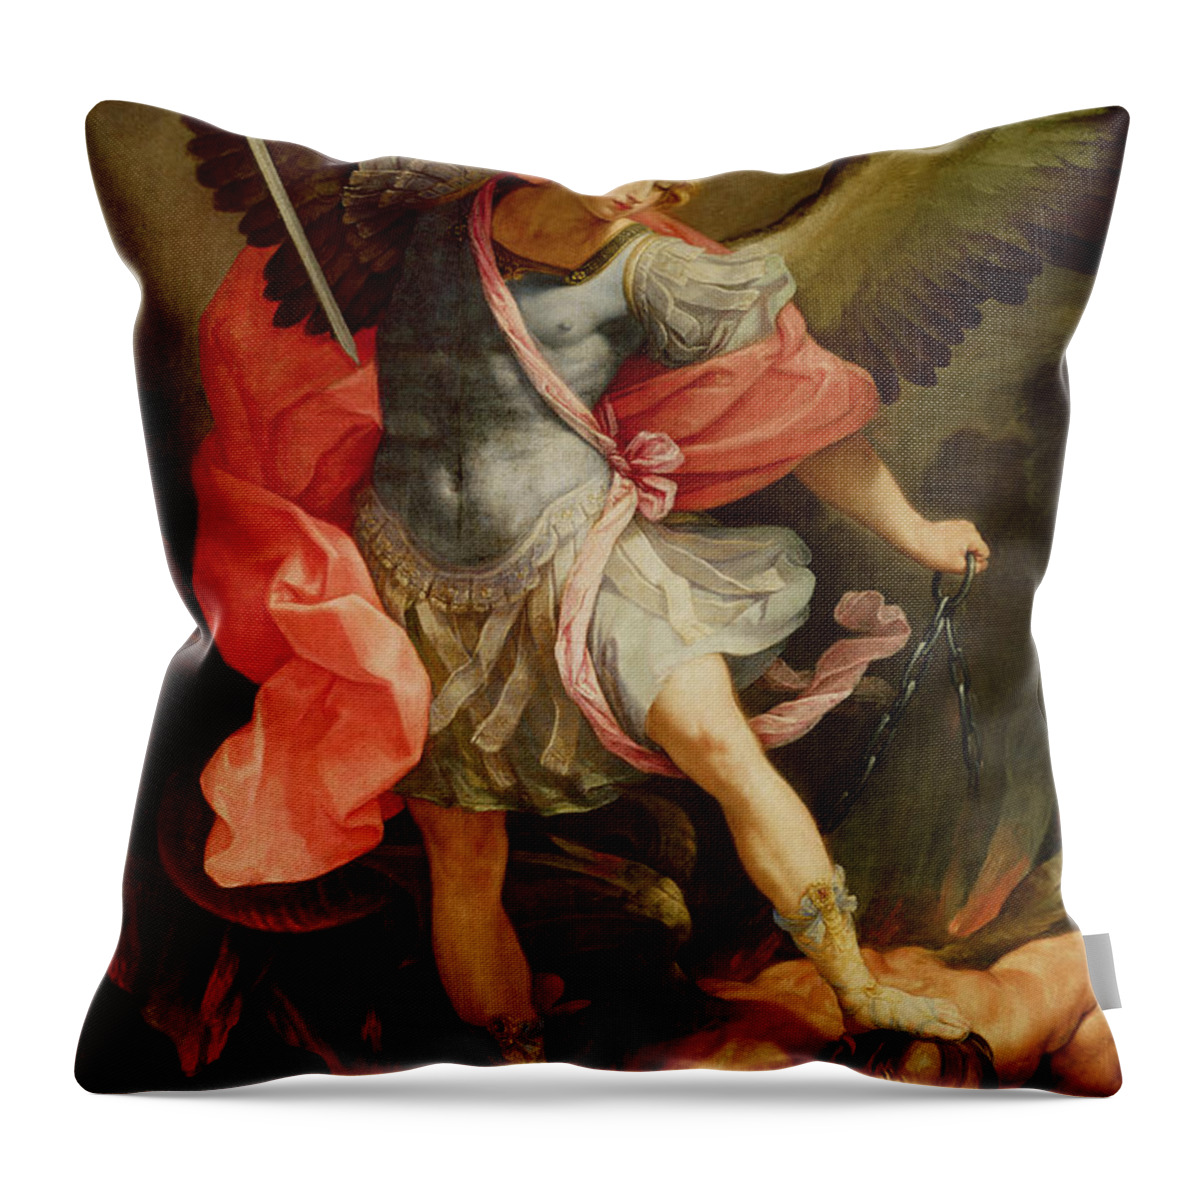 The Throw Pillow featuring the painting The Archangel Michael defeating Satan by Guido Reni